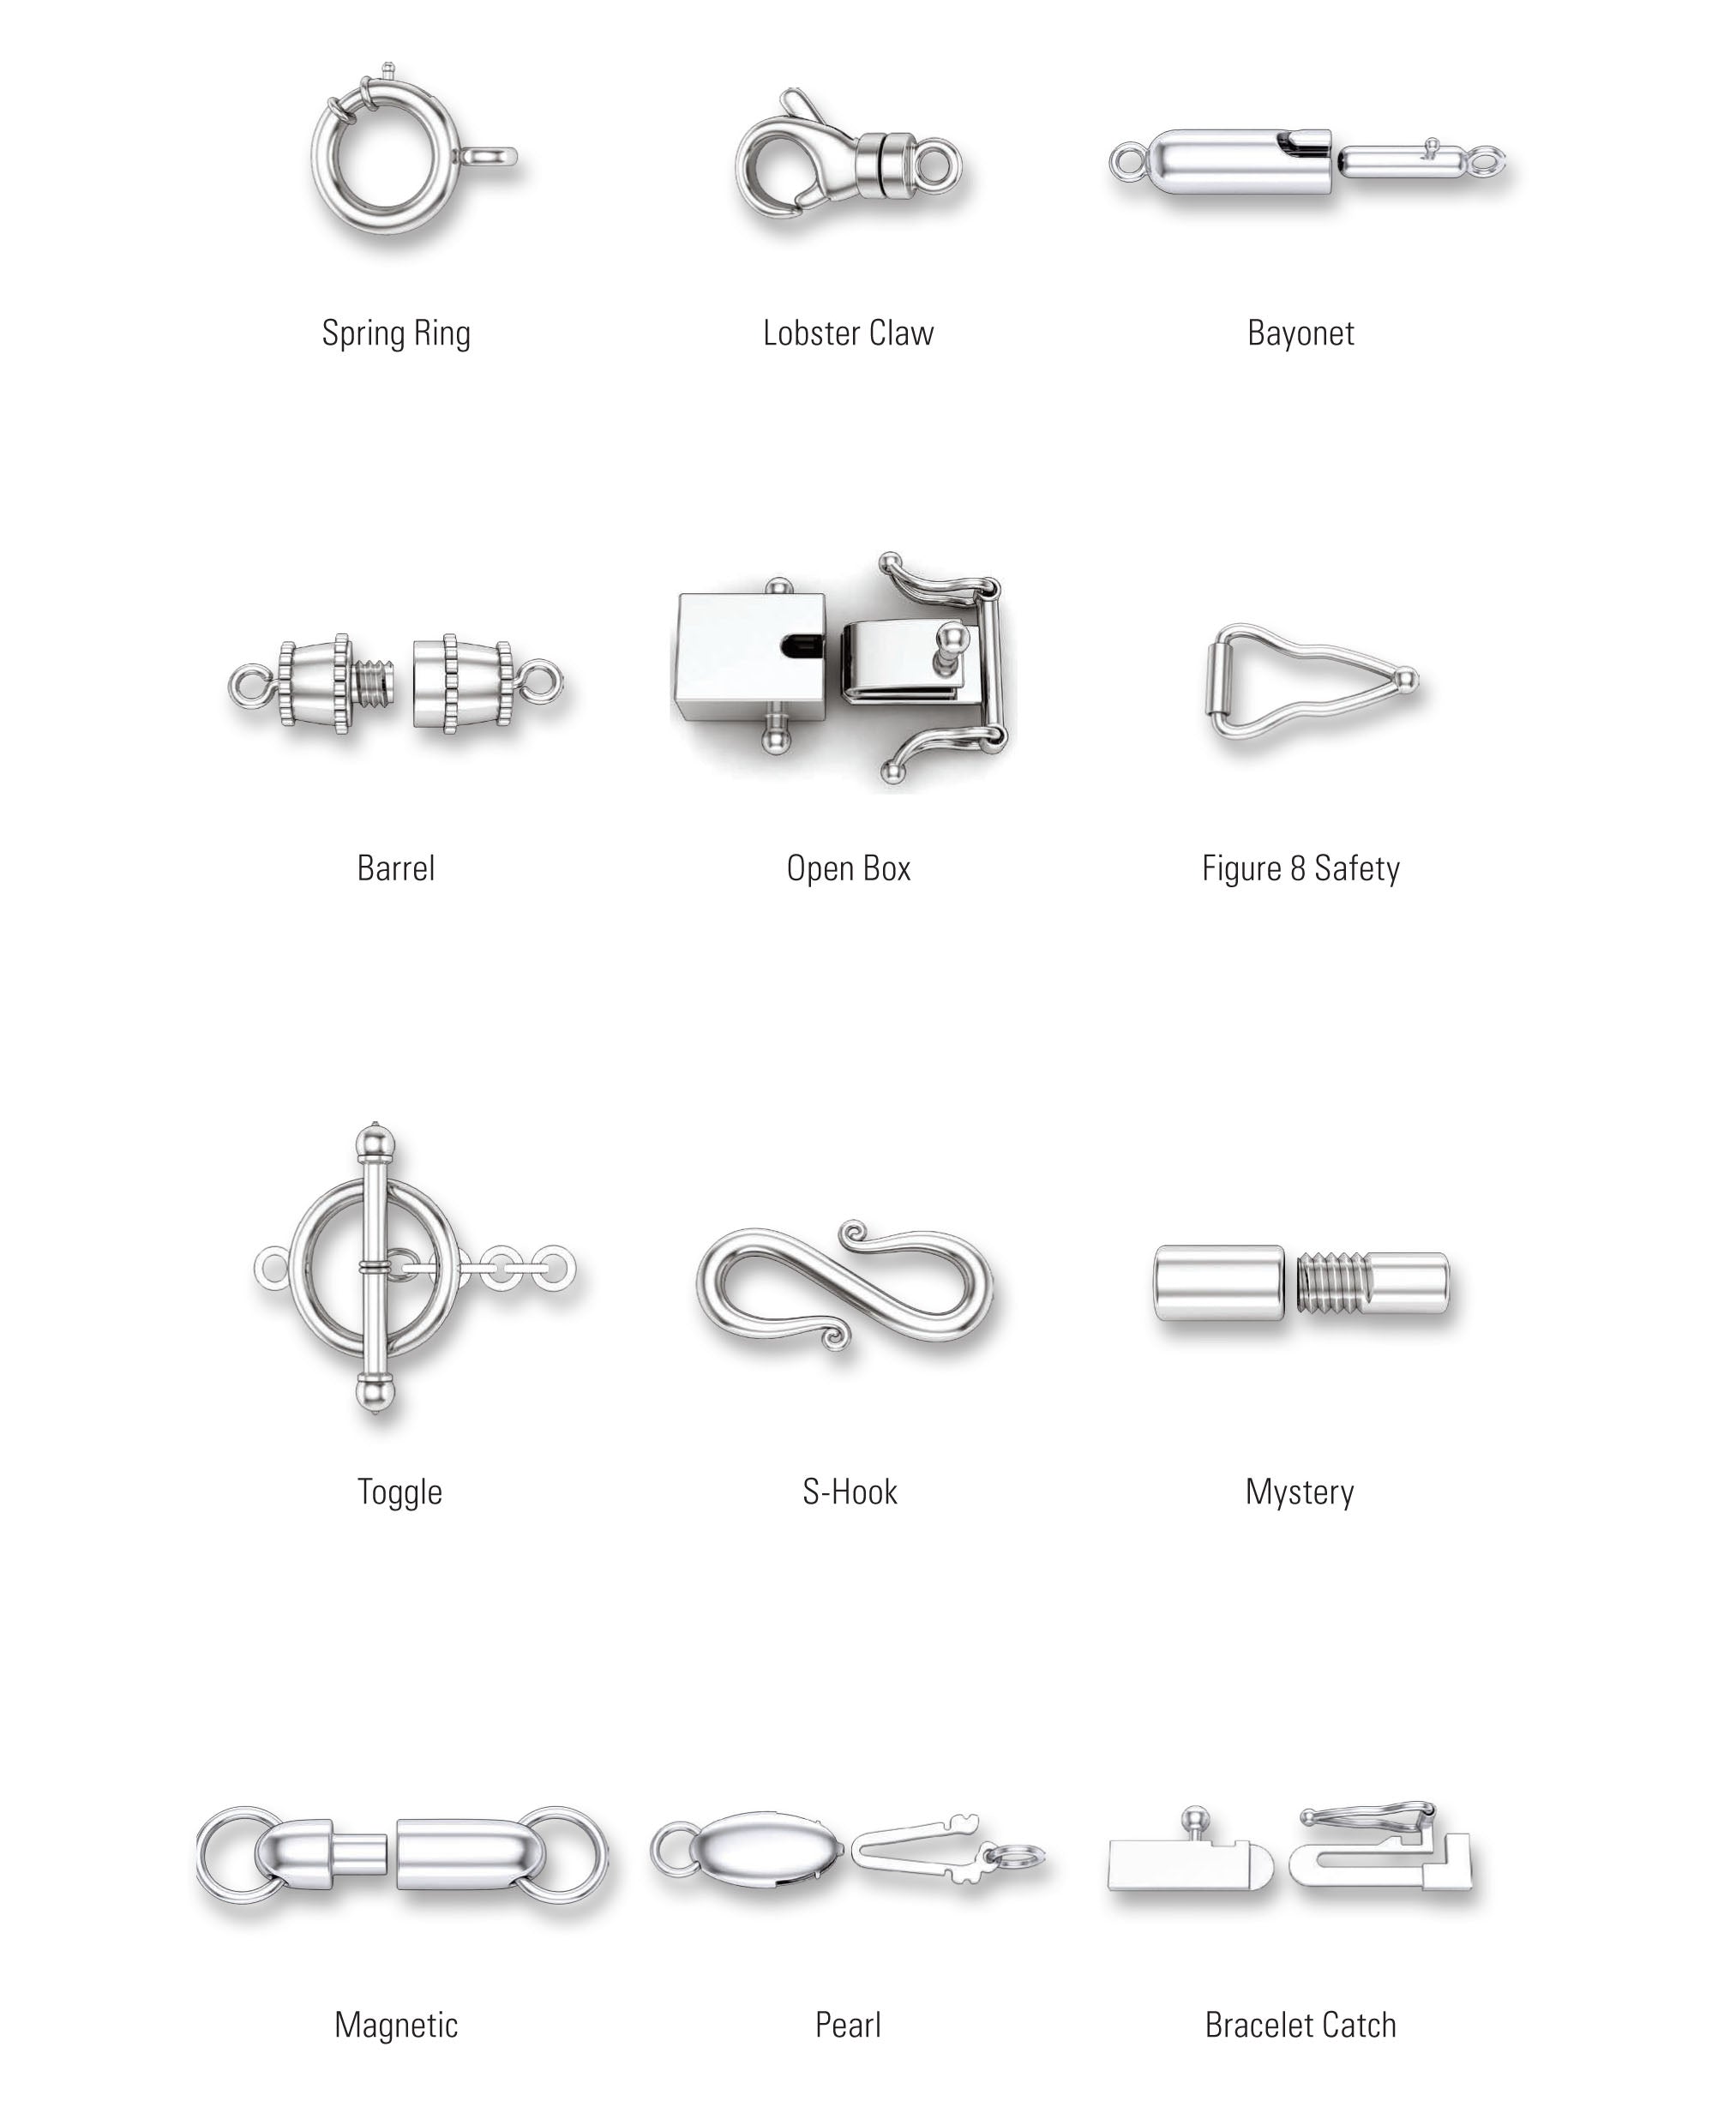 Clasp Types by The Black Bow Jewelry Company include spring ring, lobster claw, bayonet, barrel clasps, box clasps, toggle clasps, s-hook clasps, mystery clasps, magnetic clasps, pearl clasps and bracelet clasps